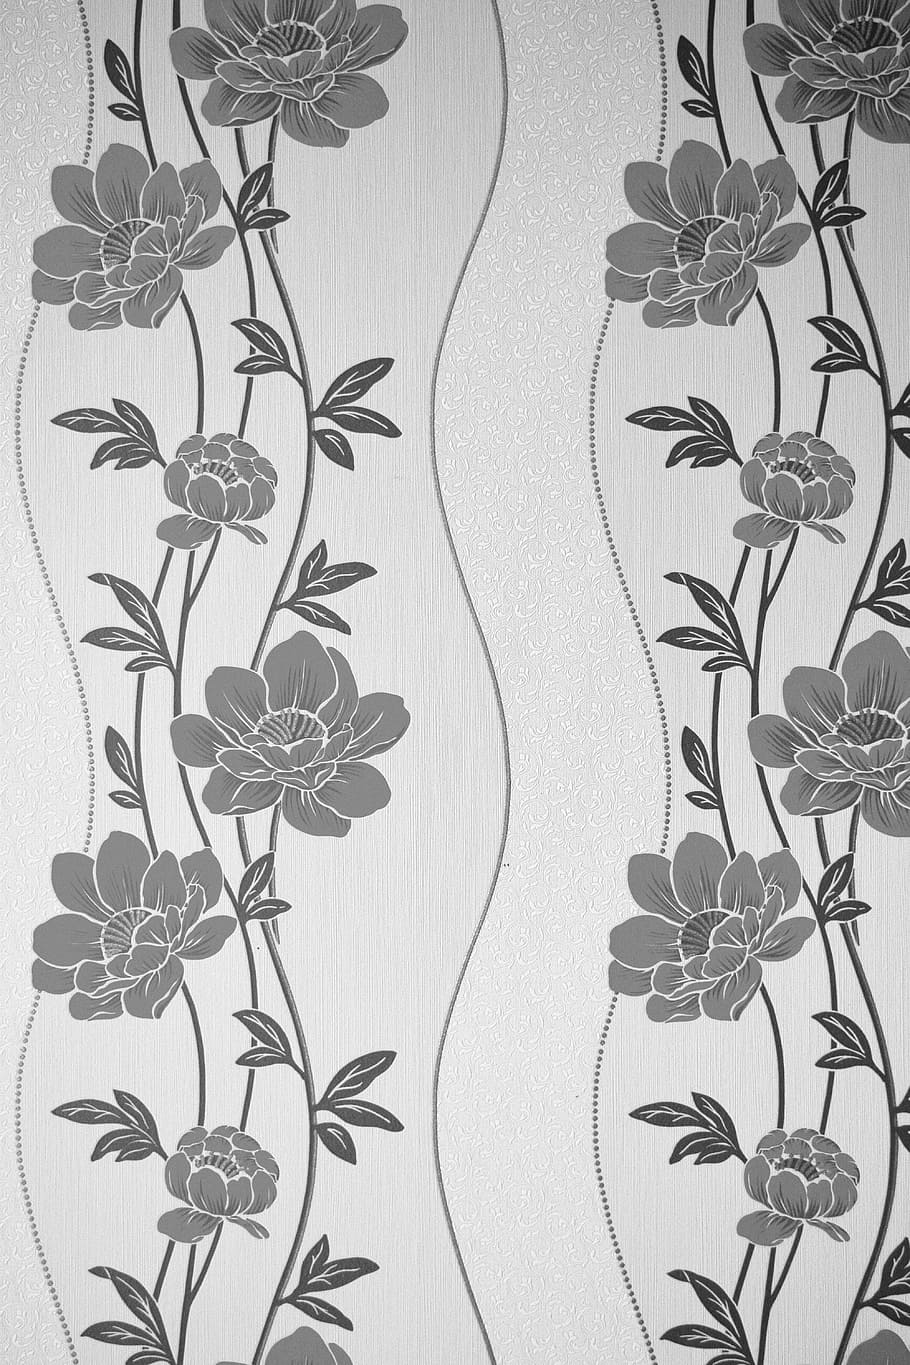 gray and white floral print wall decor, black and white, texture